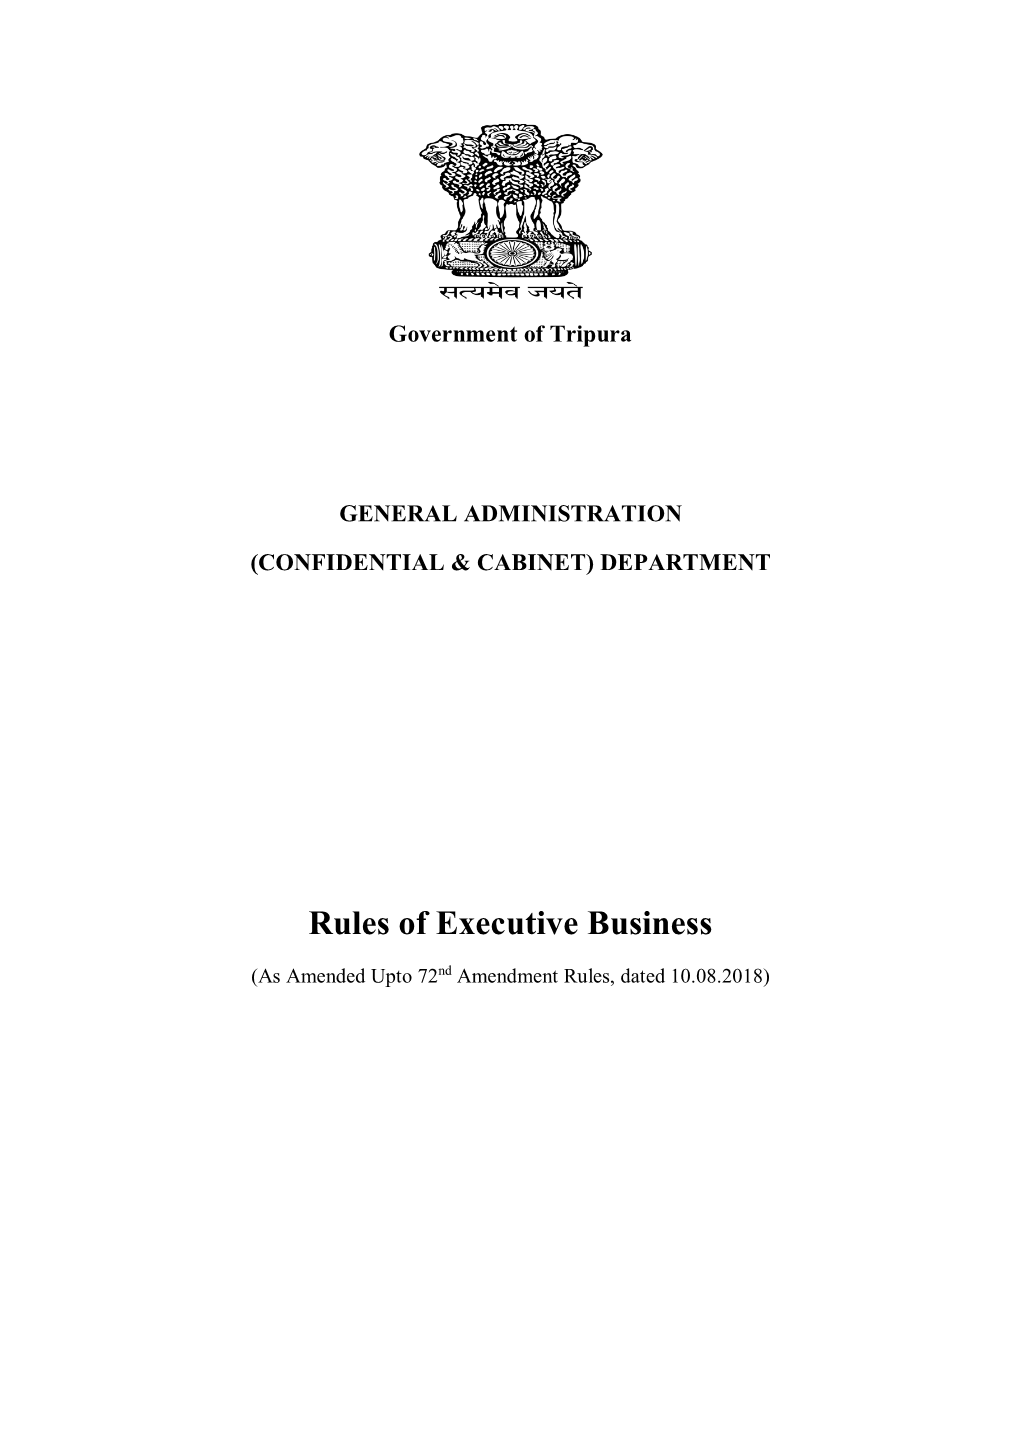 Rules of Executive Business